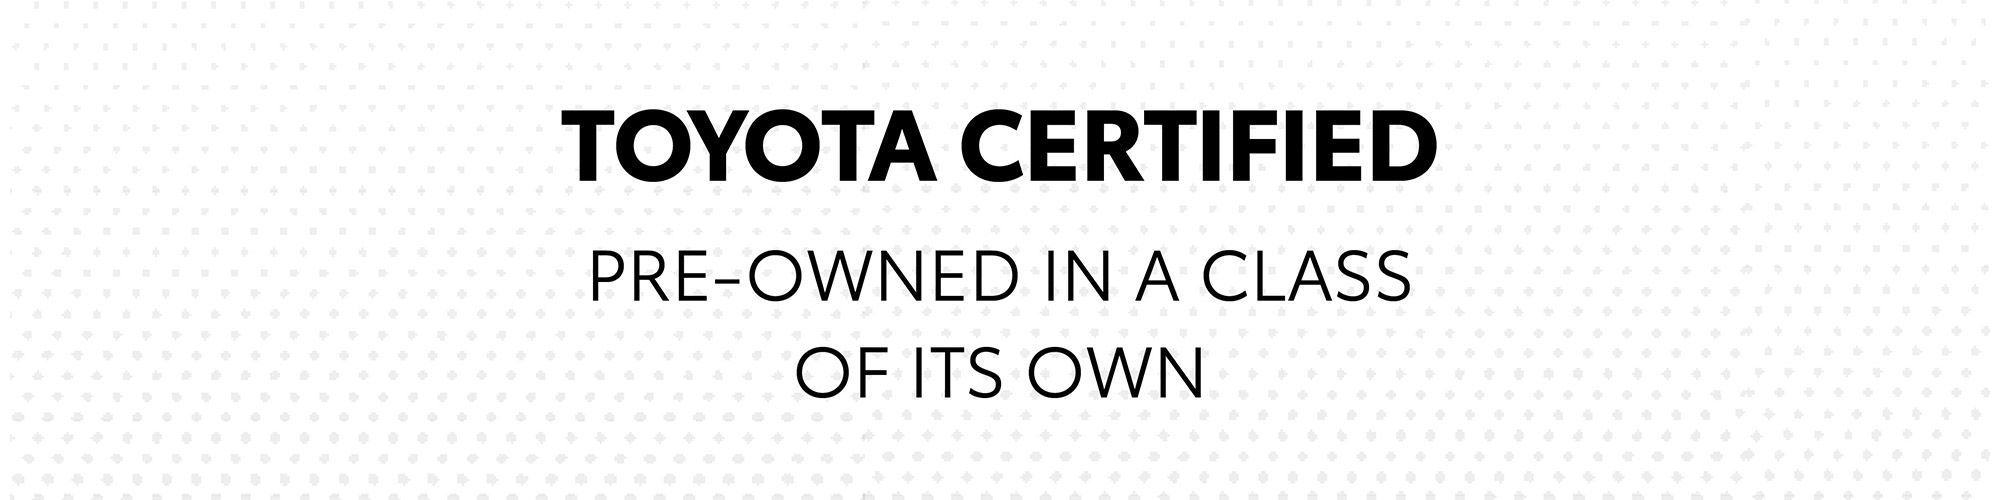 About Toyota Certified Vehicles